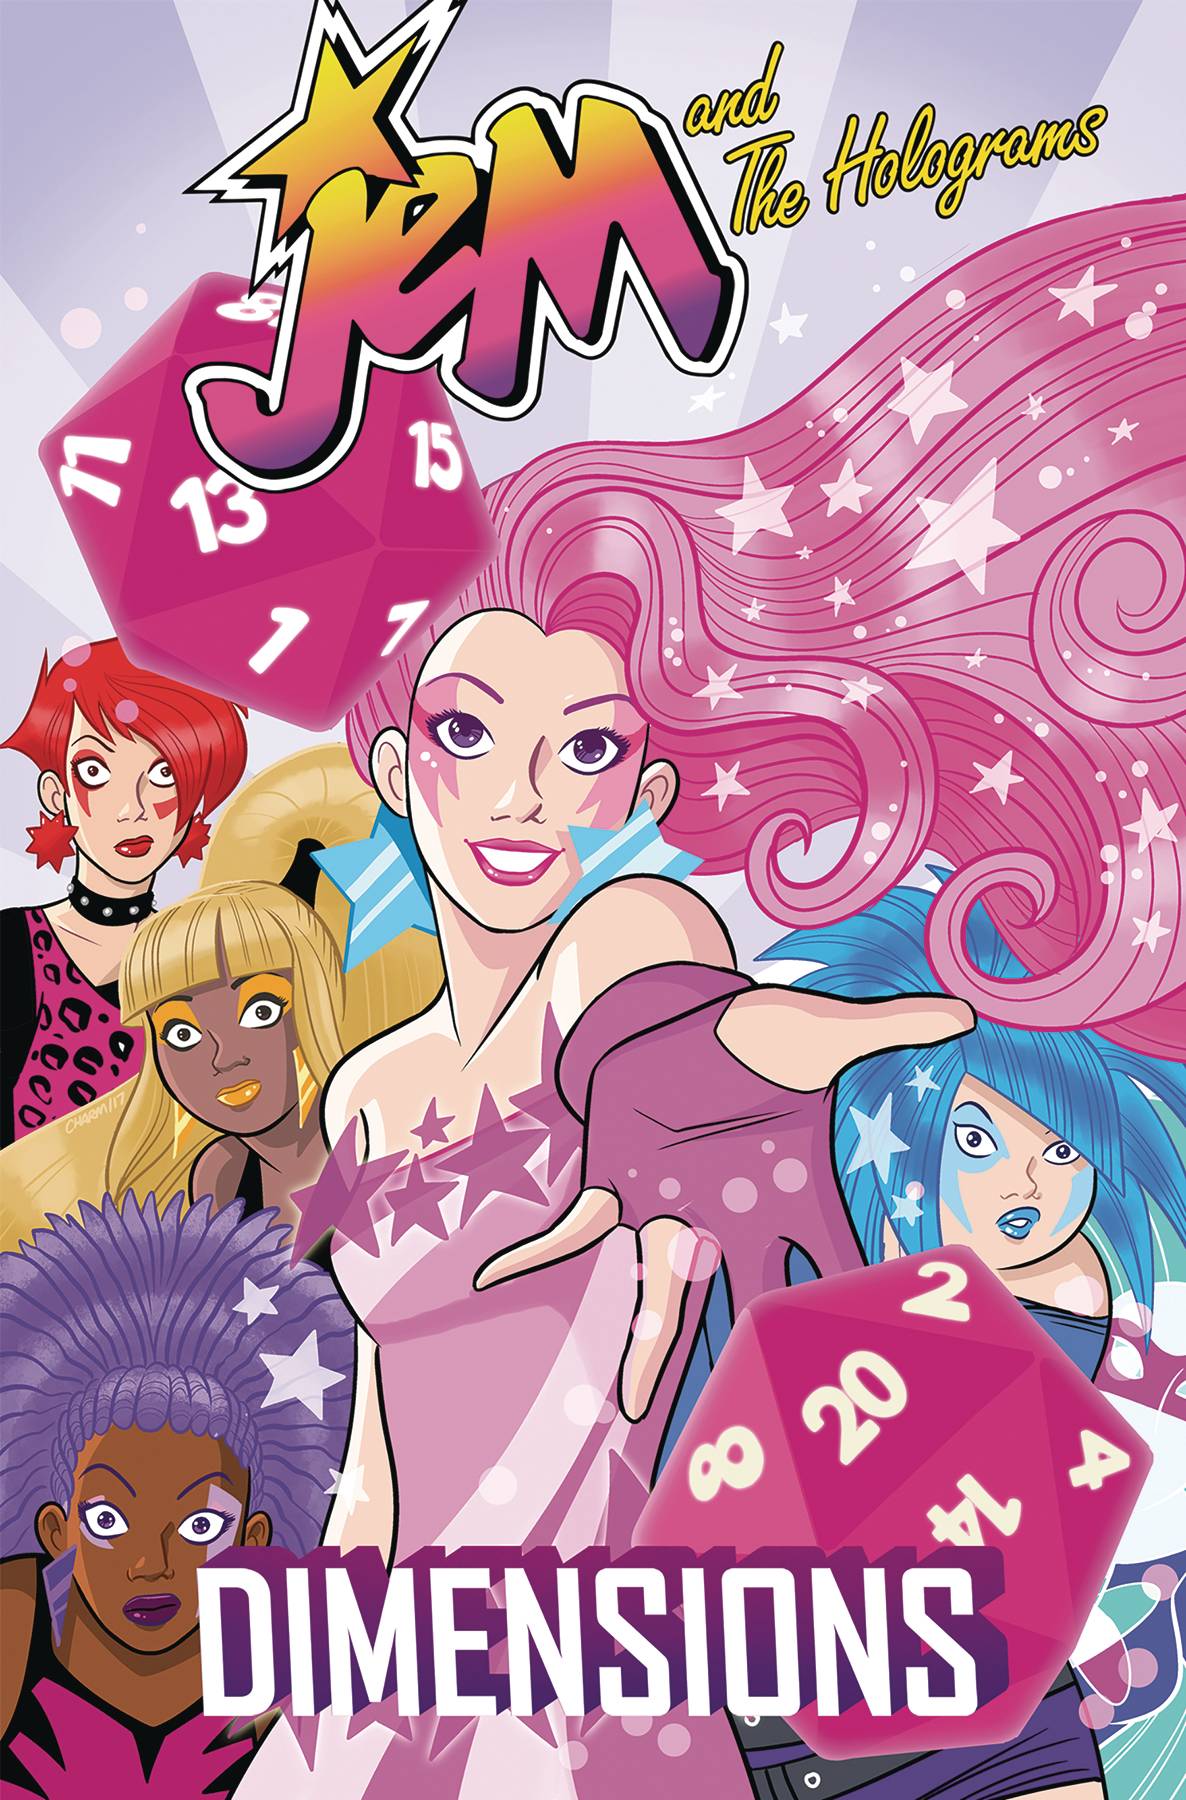 Jem and the Holograms Dimensions Graphic Novel